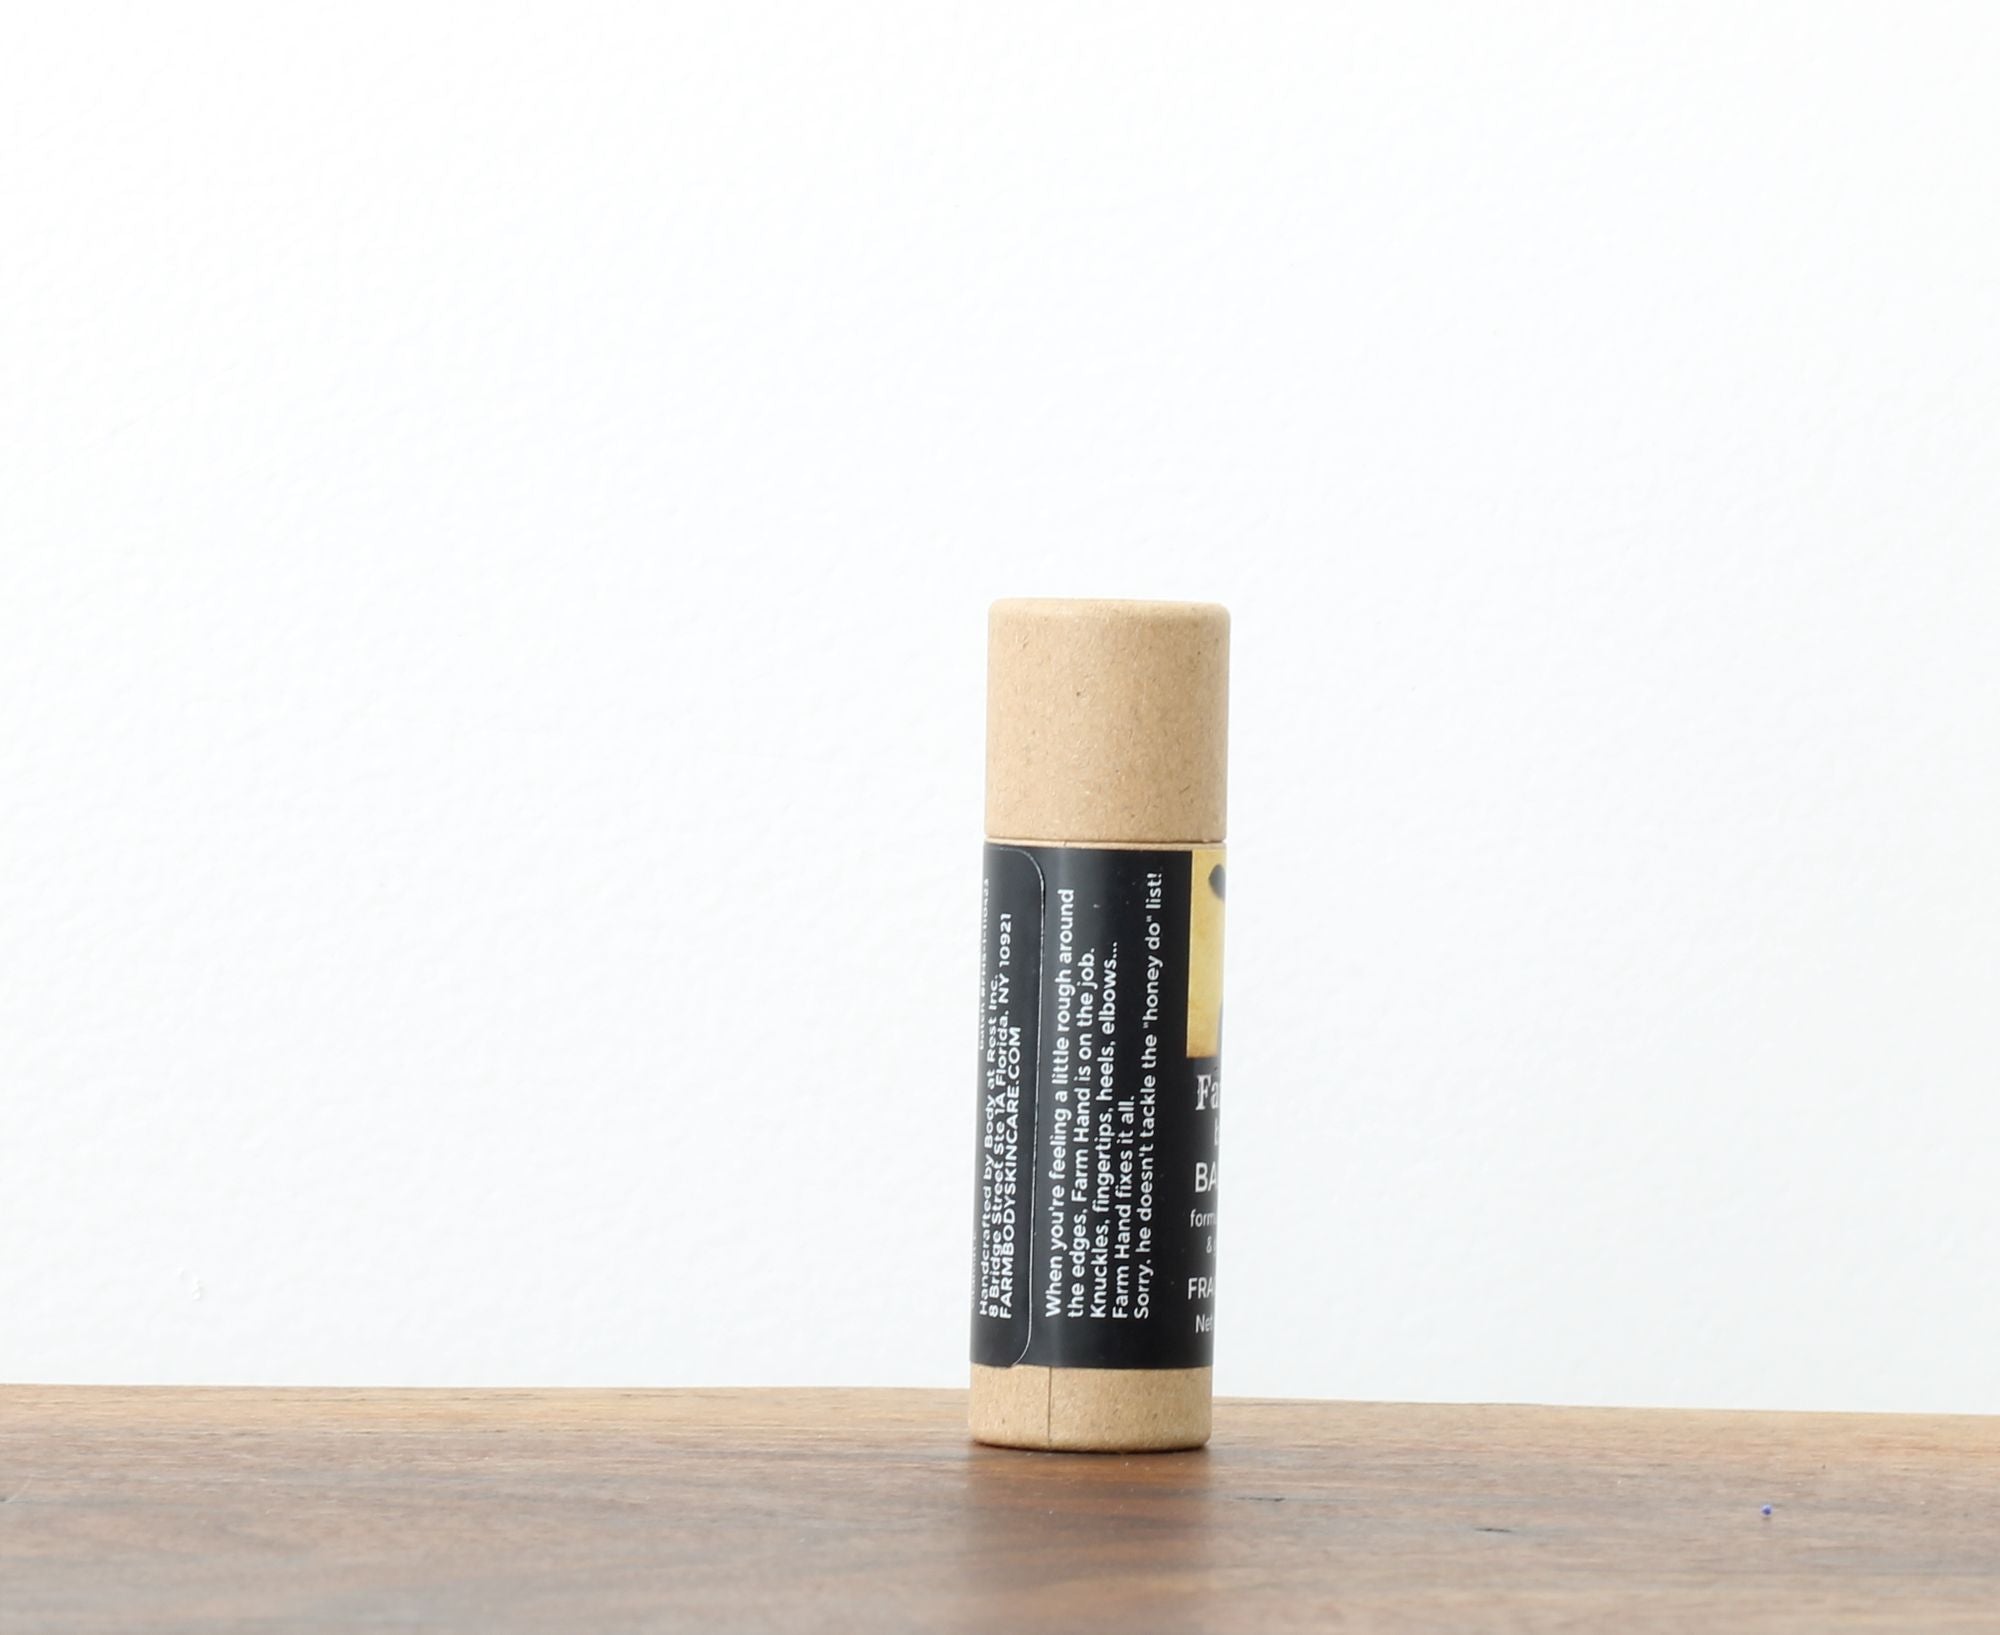 Farmbody Farm Hand Botanical Balm stick is on the job for elbows, knuckles, fingertips, heels and more